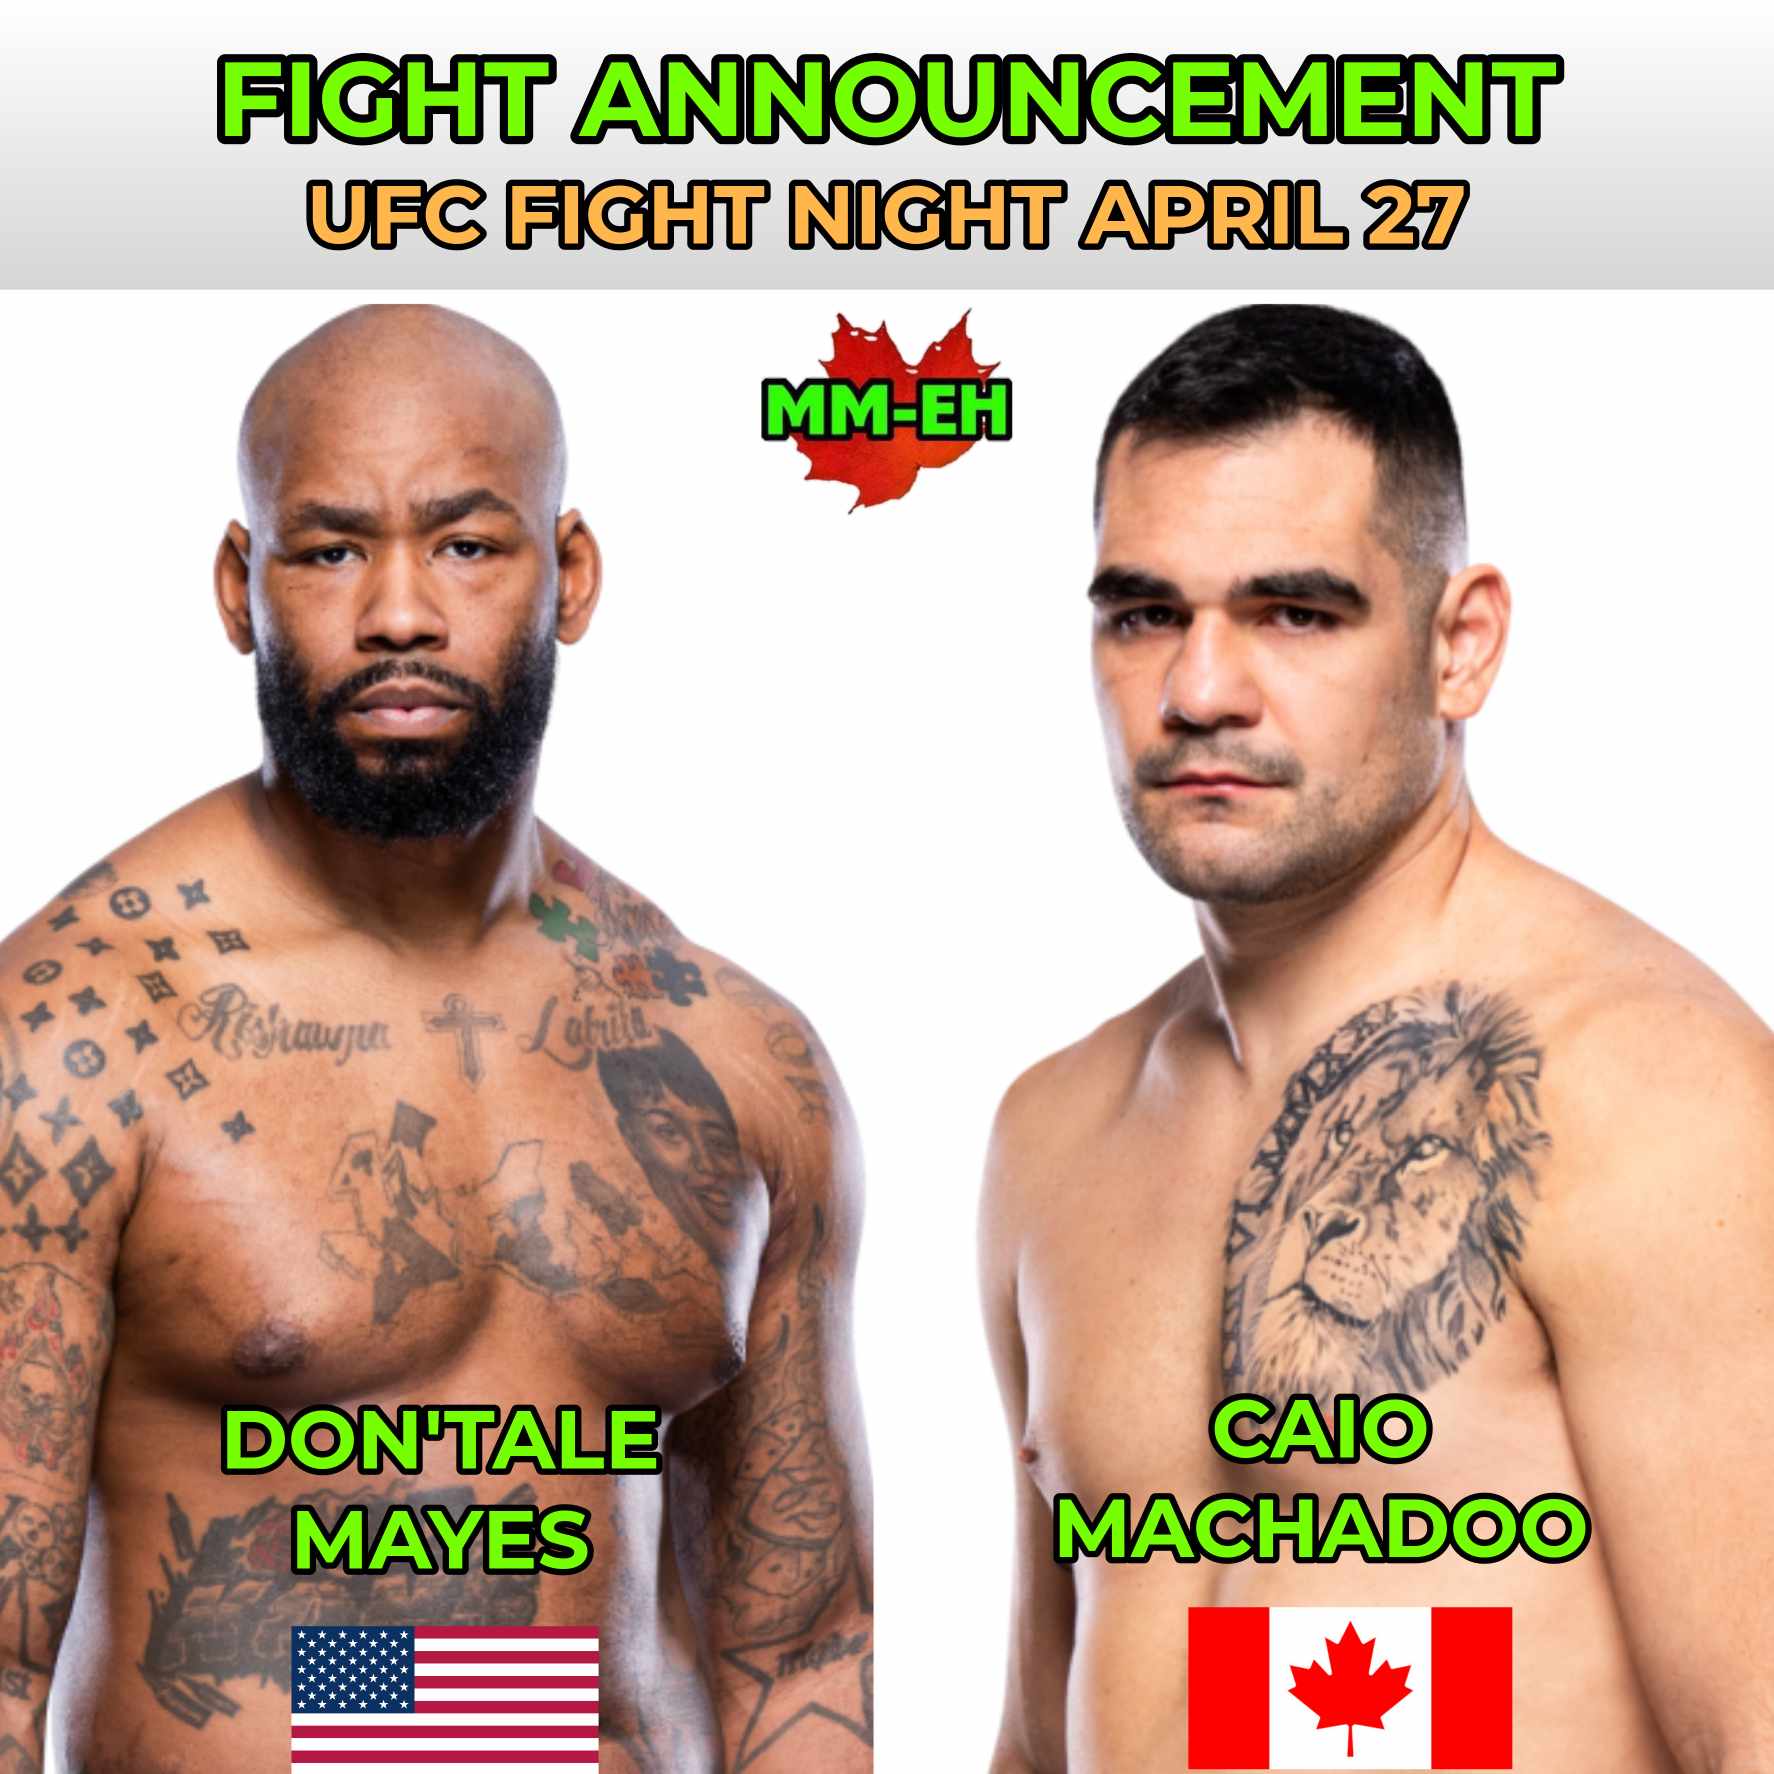 UFC News: Vancouver’s Caio Machado To Take On Don’Tale Mayes In April